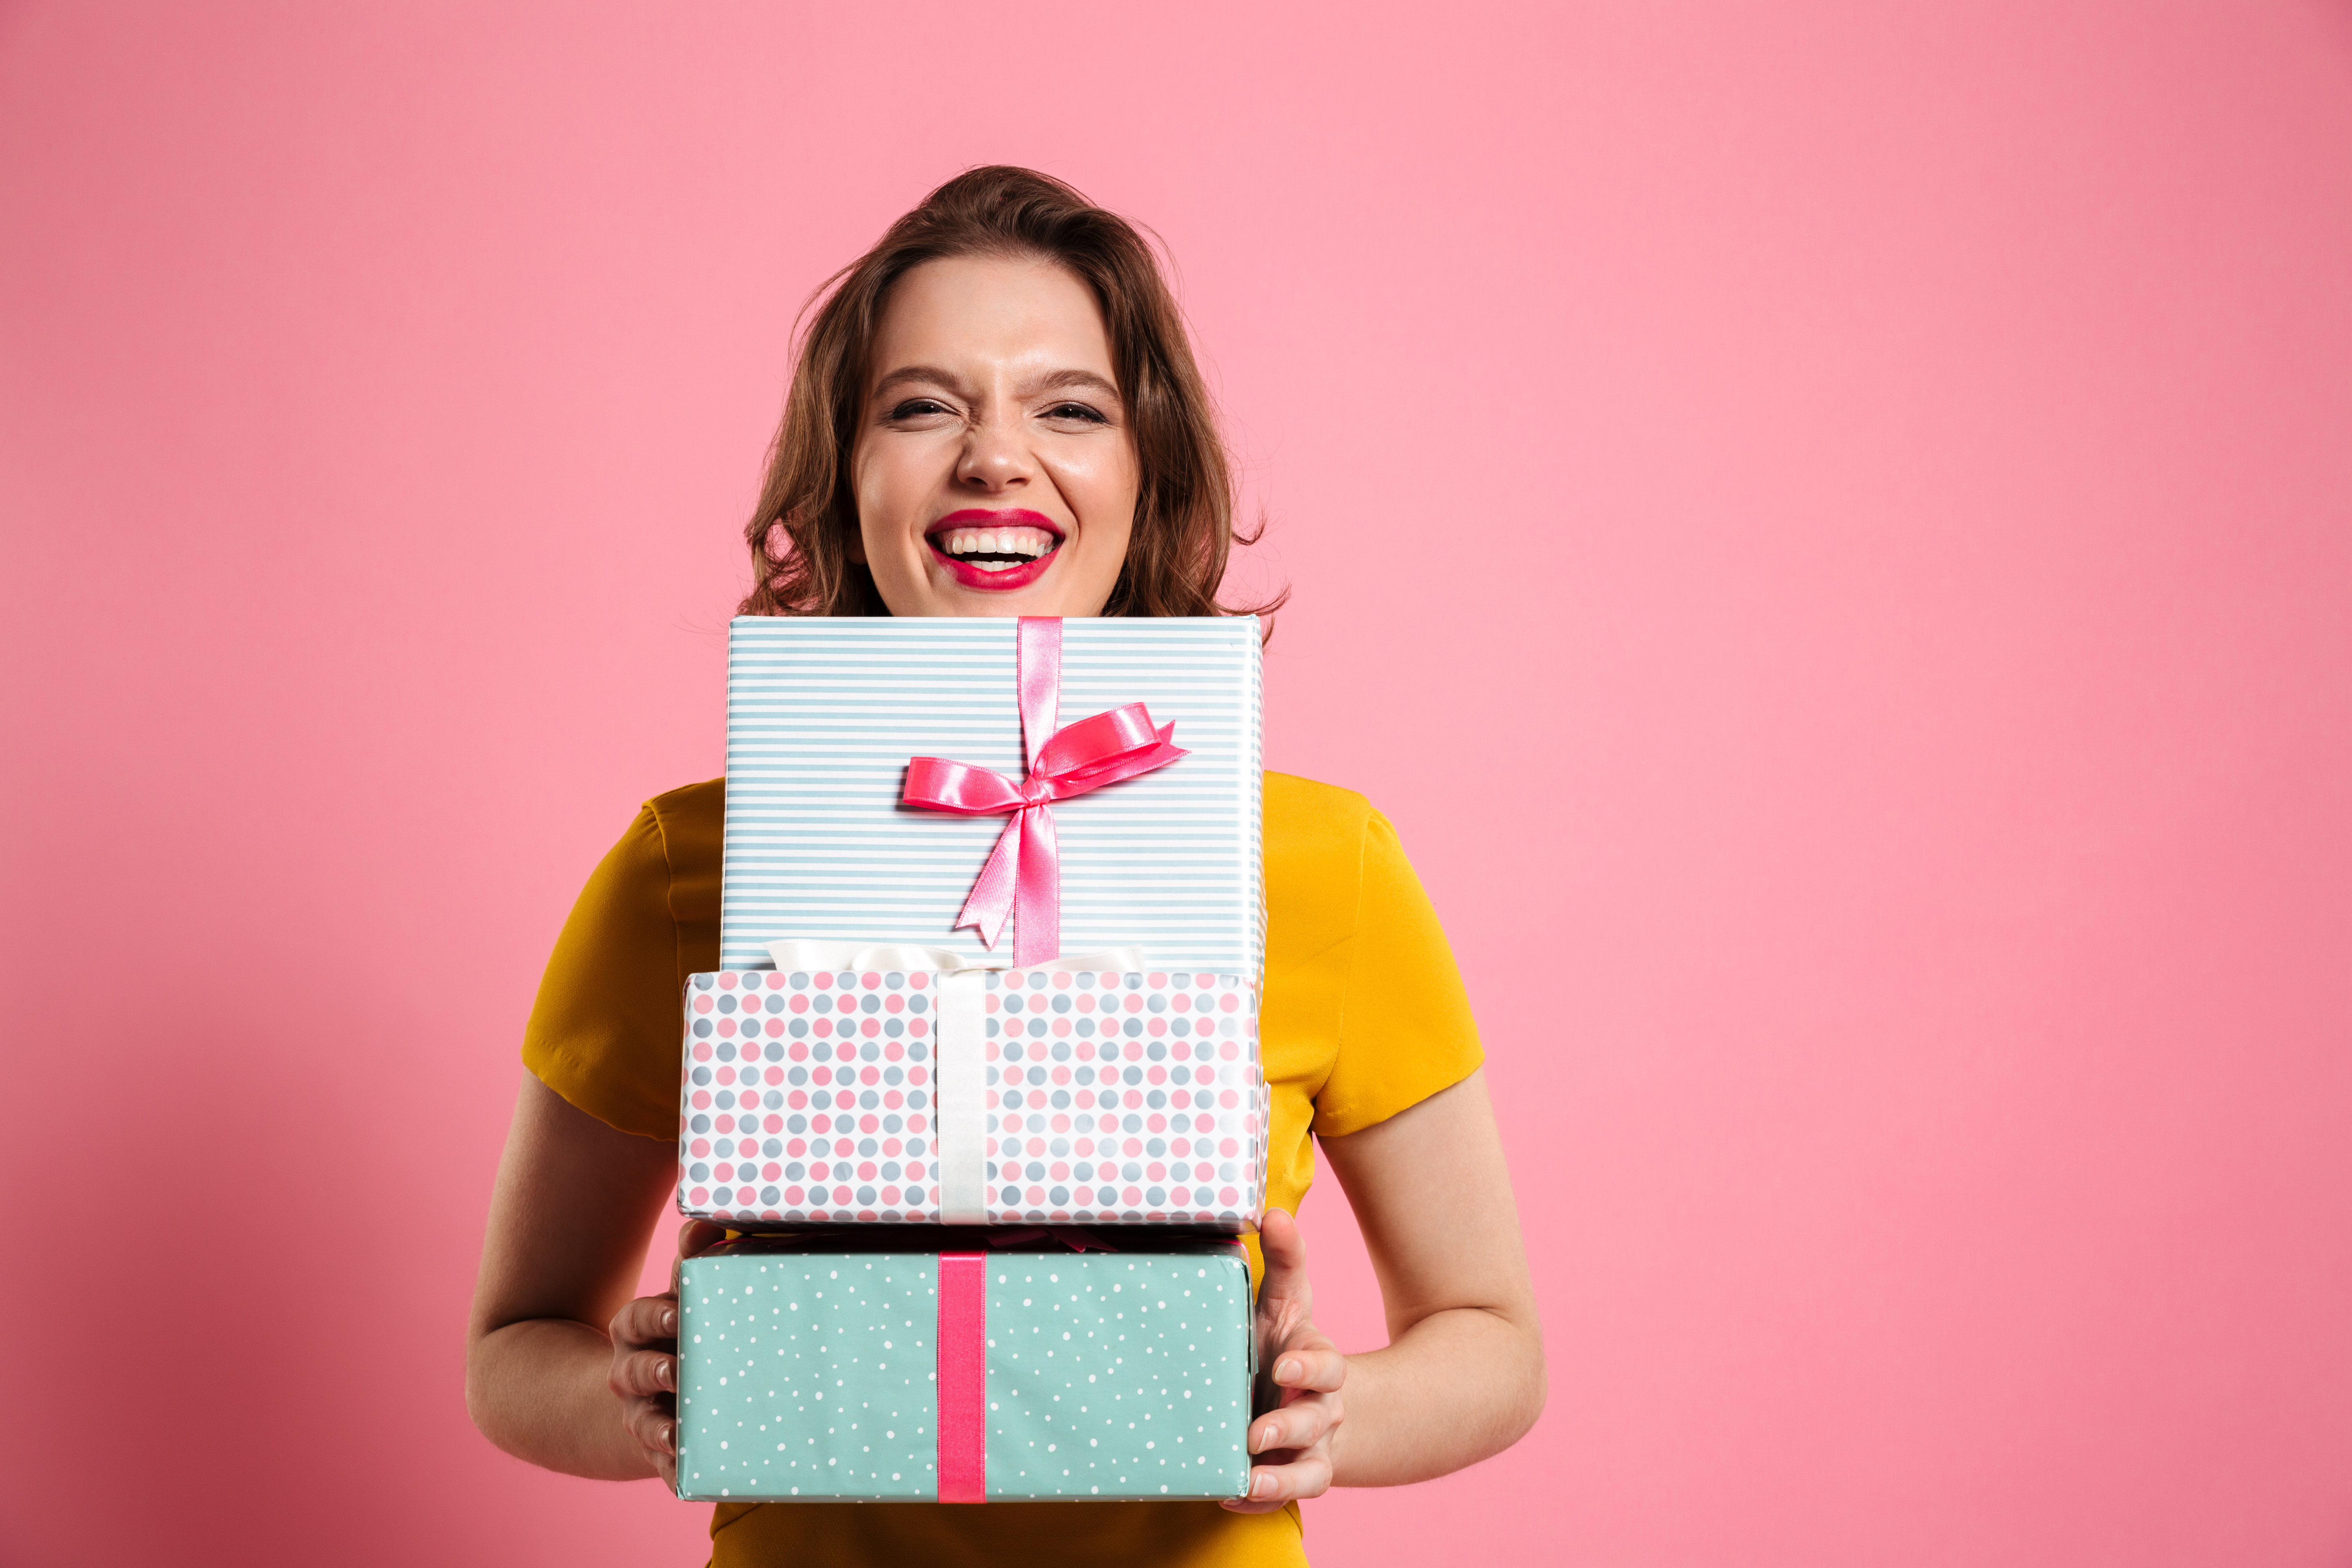 A woman holding gifts | Source: Shutterstock